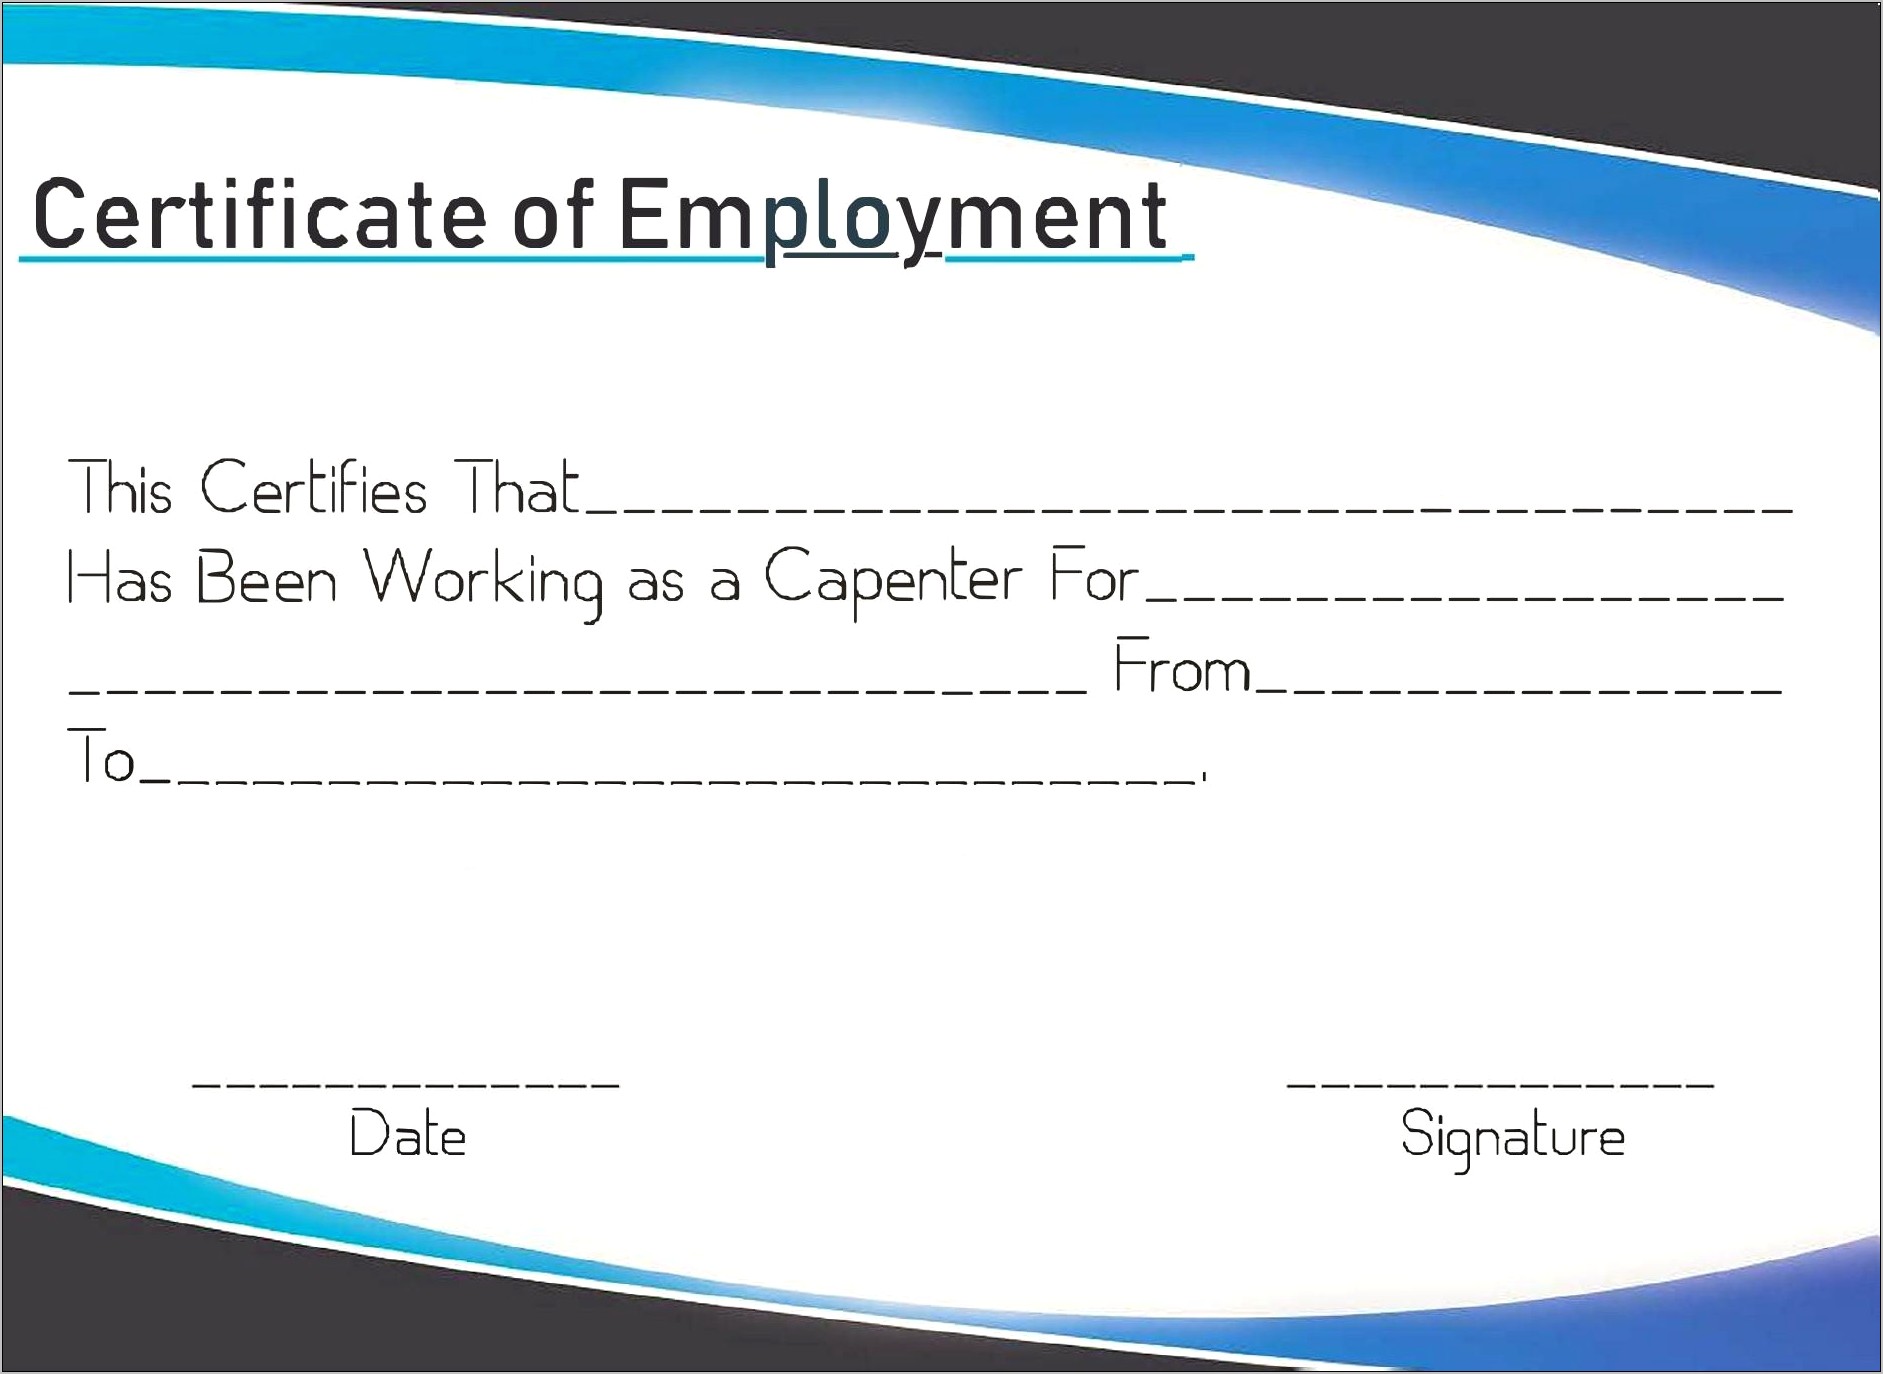 Certificate Of Employment Template Free Download Resume Example Gallery